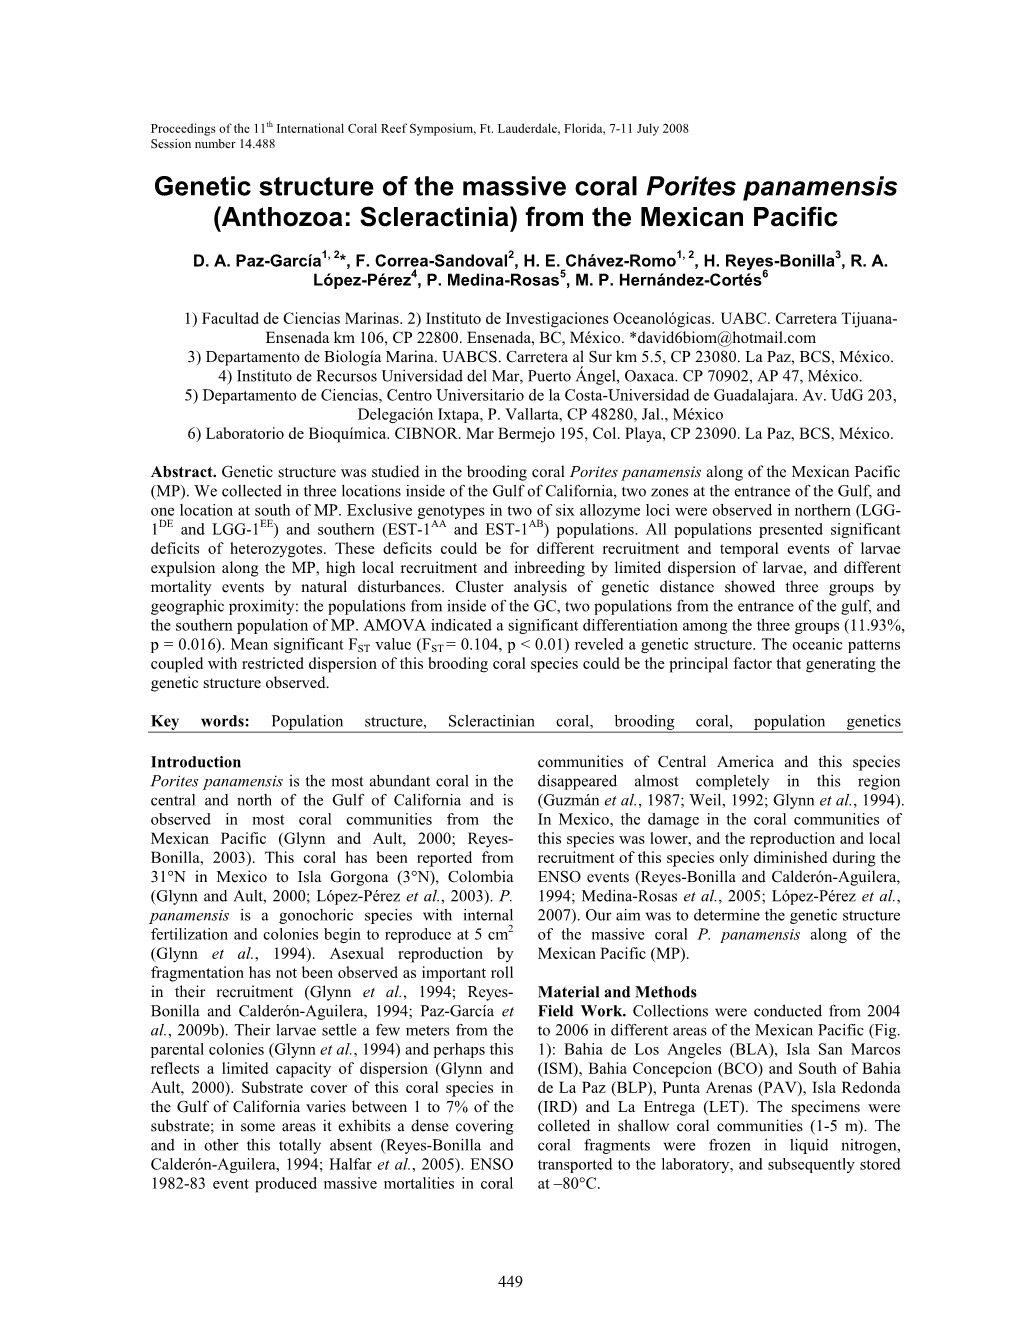 Genetic Structure of the Massive Coral Porites Panamensis (Anthozoa: Scleractinia) from the Mexican Pacific